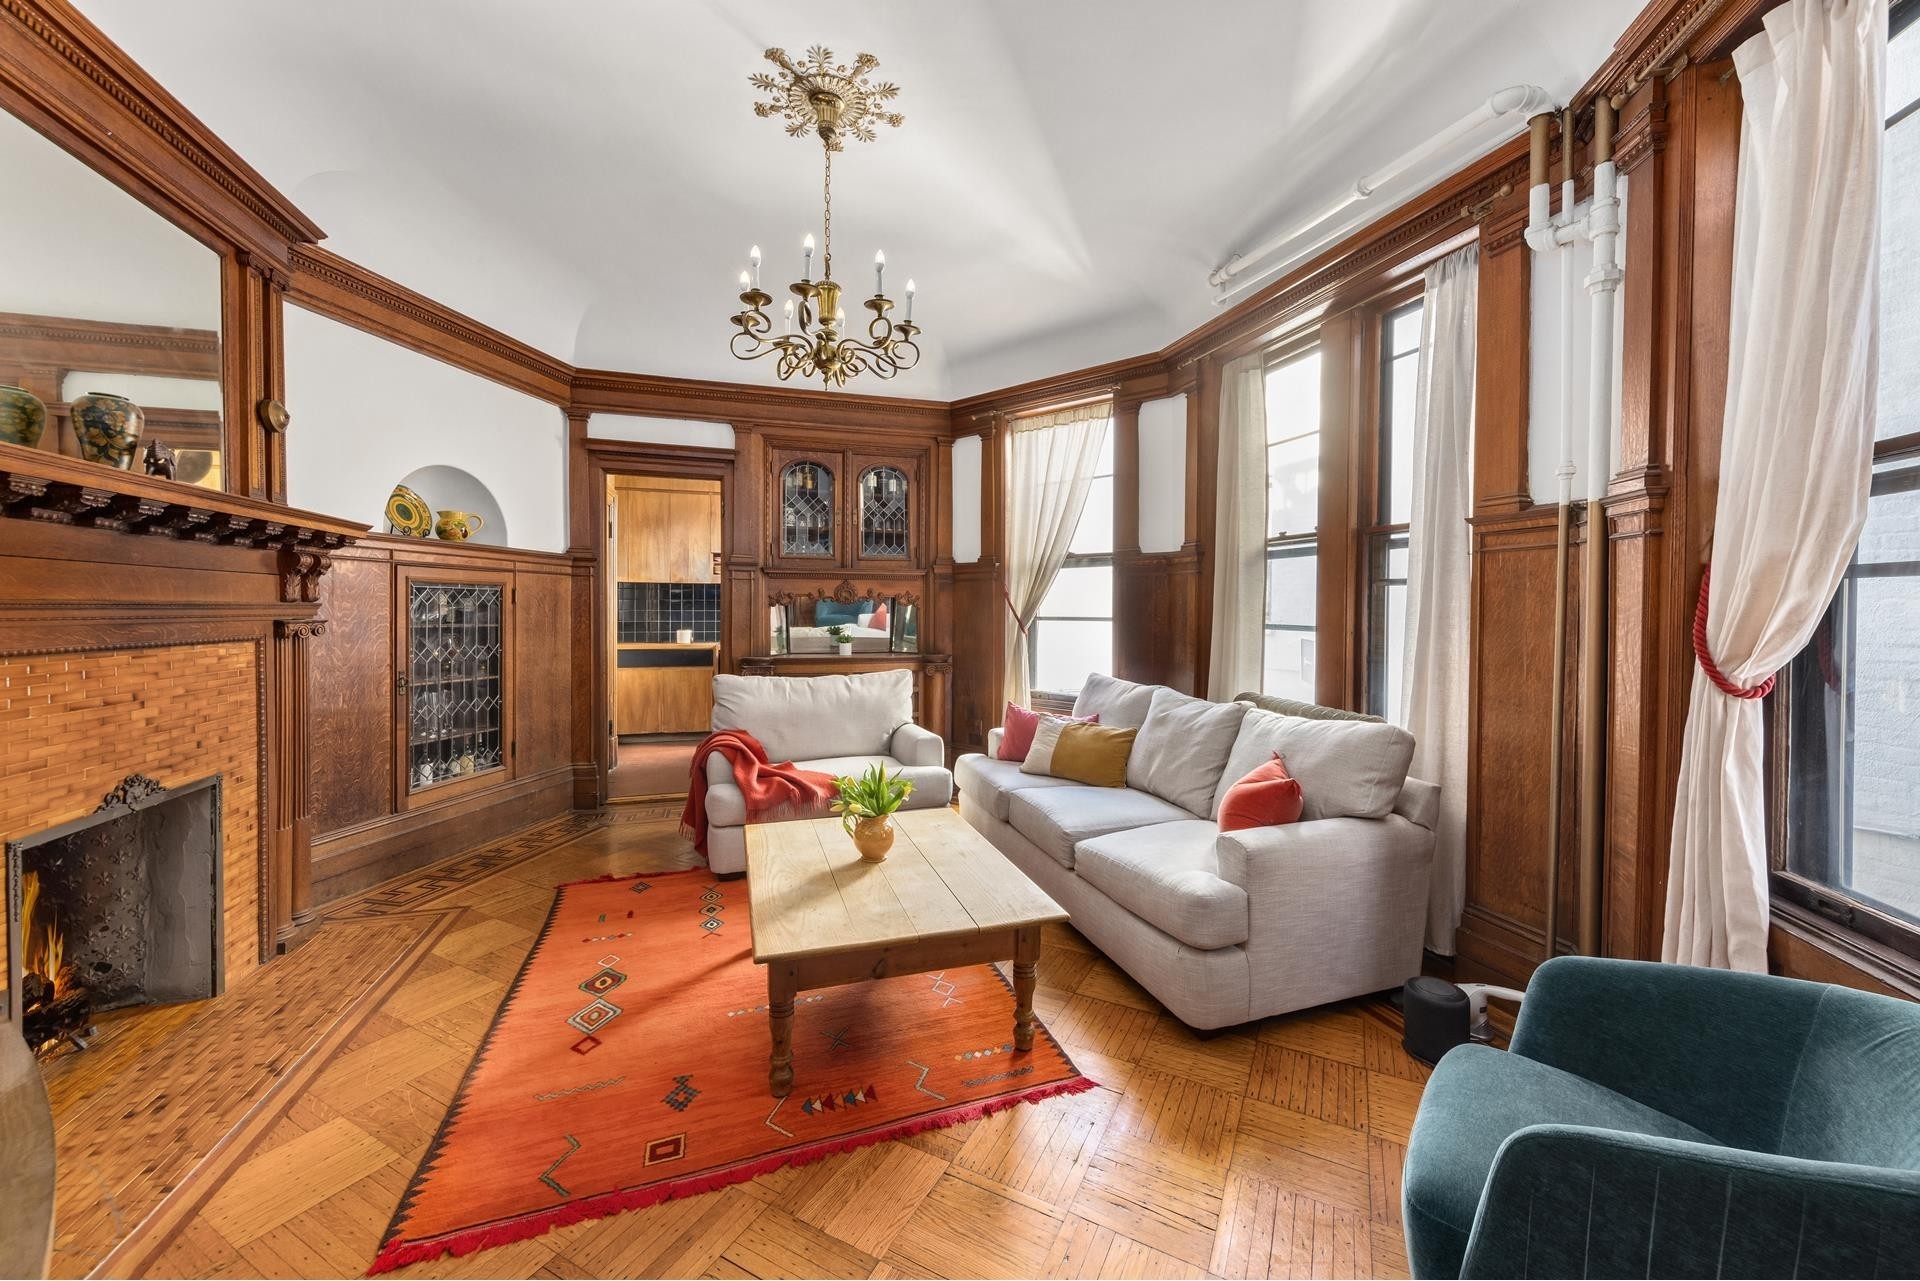 Co-op Properties for Sale at 120 PROSPECT PARK W, 2 Park Slope, Brooklyn, New York 11215